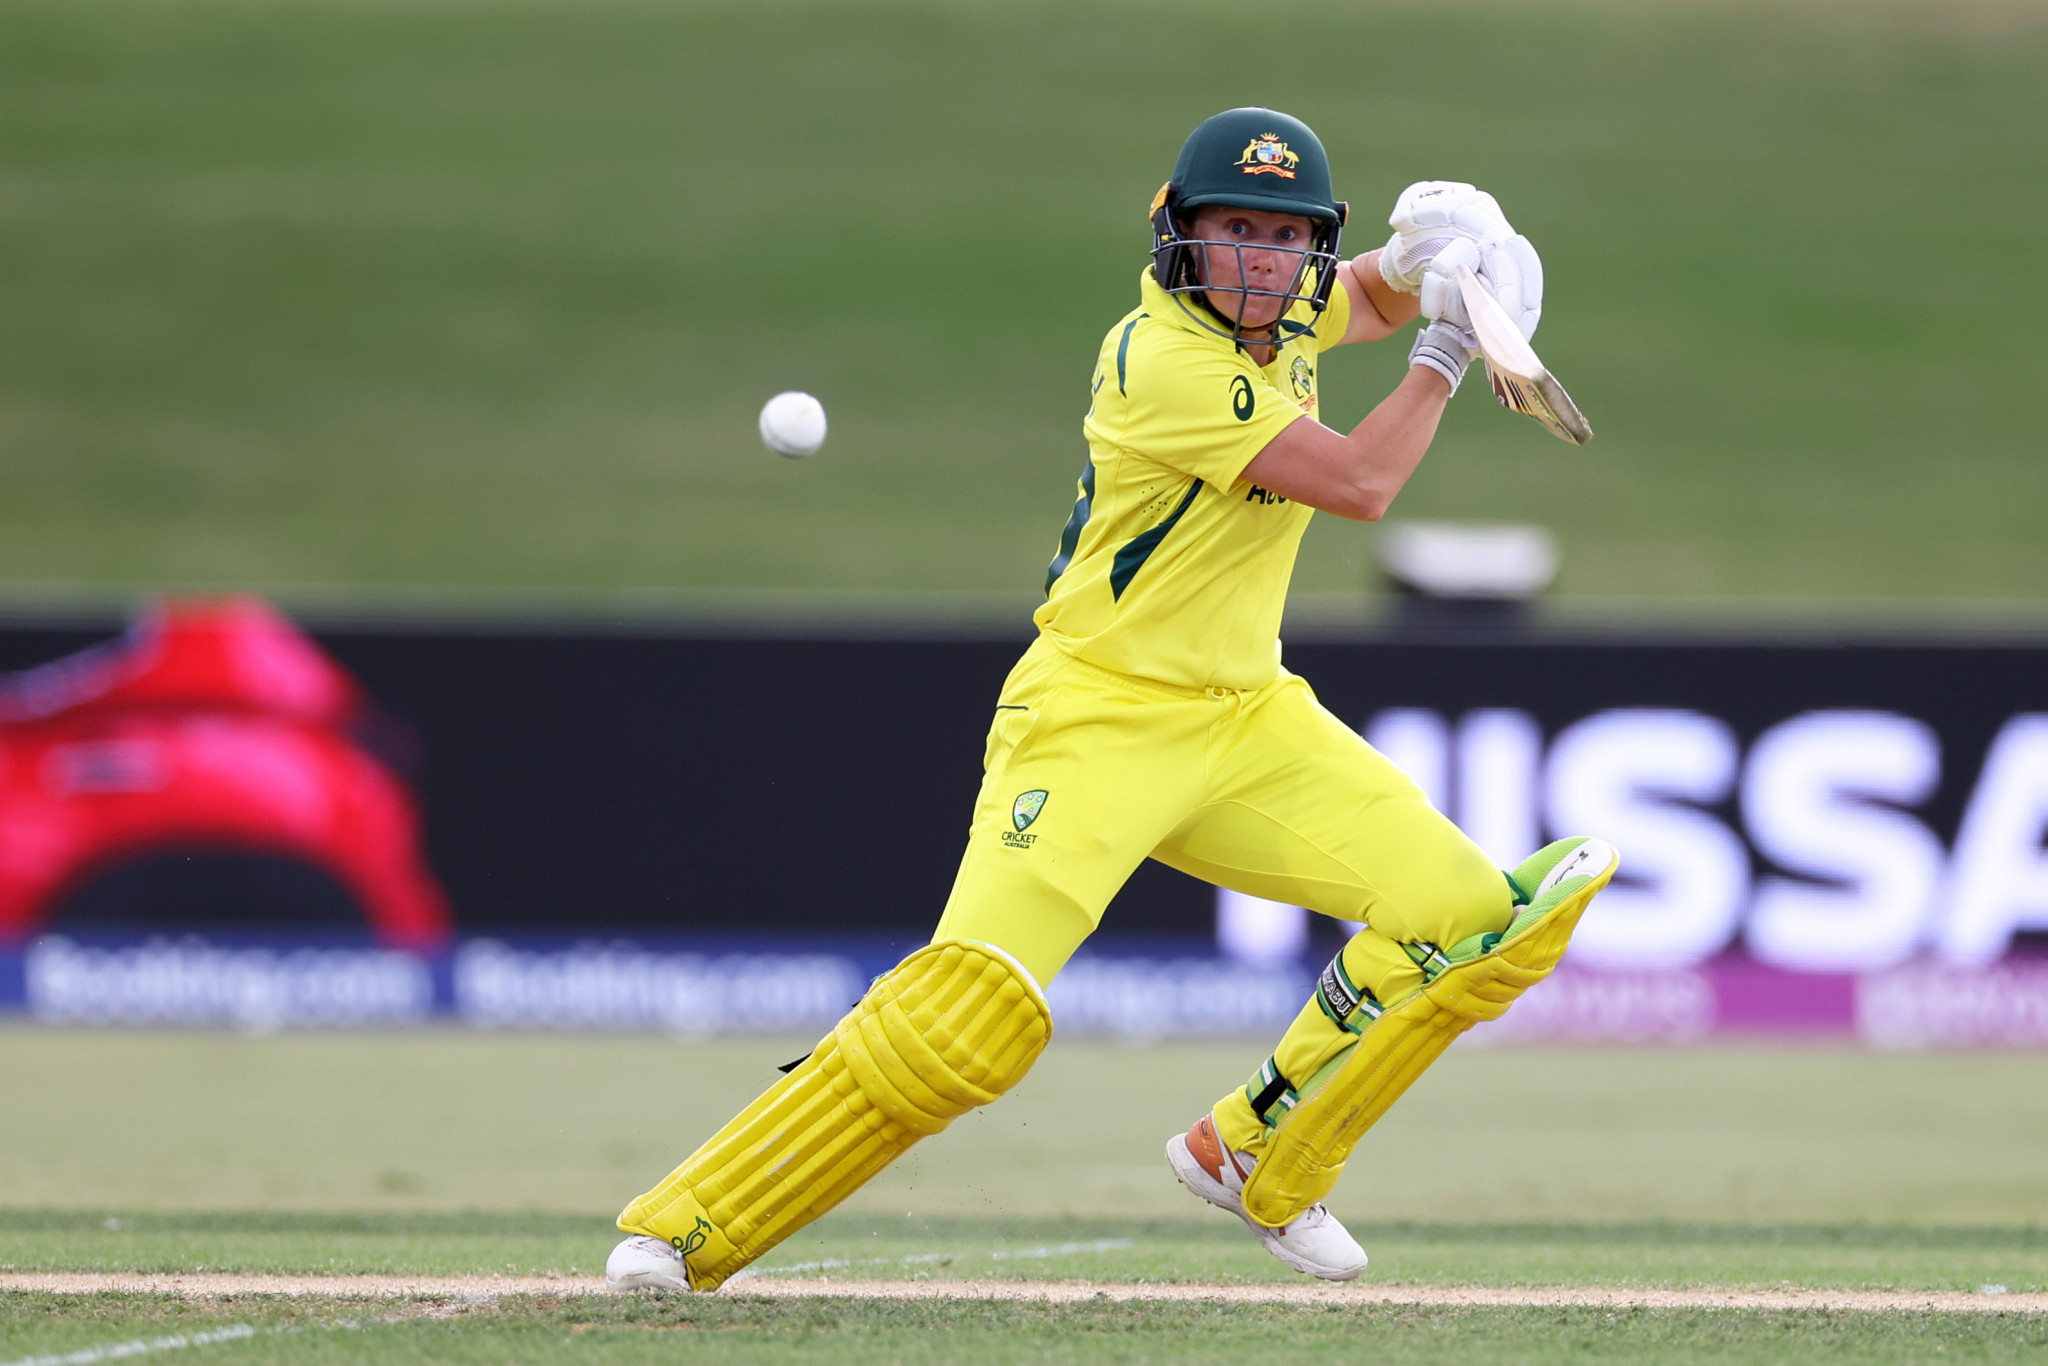 Australia win second consecutive match at Women’s Cricket World Cup after defeating Pakistan